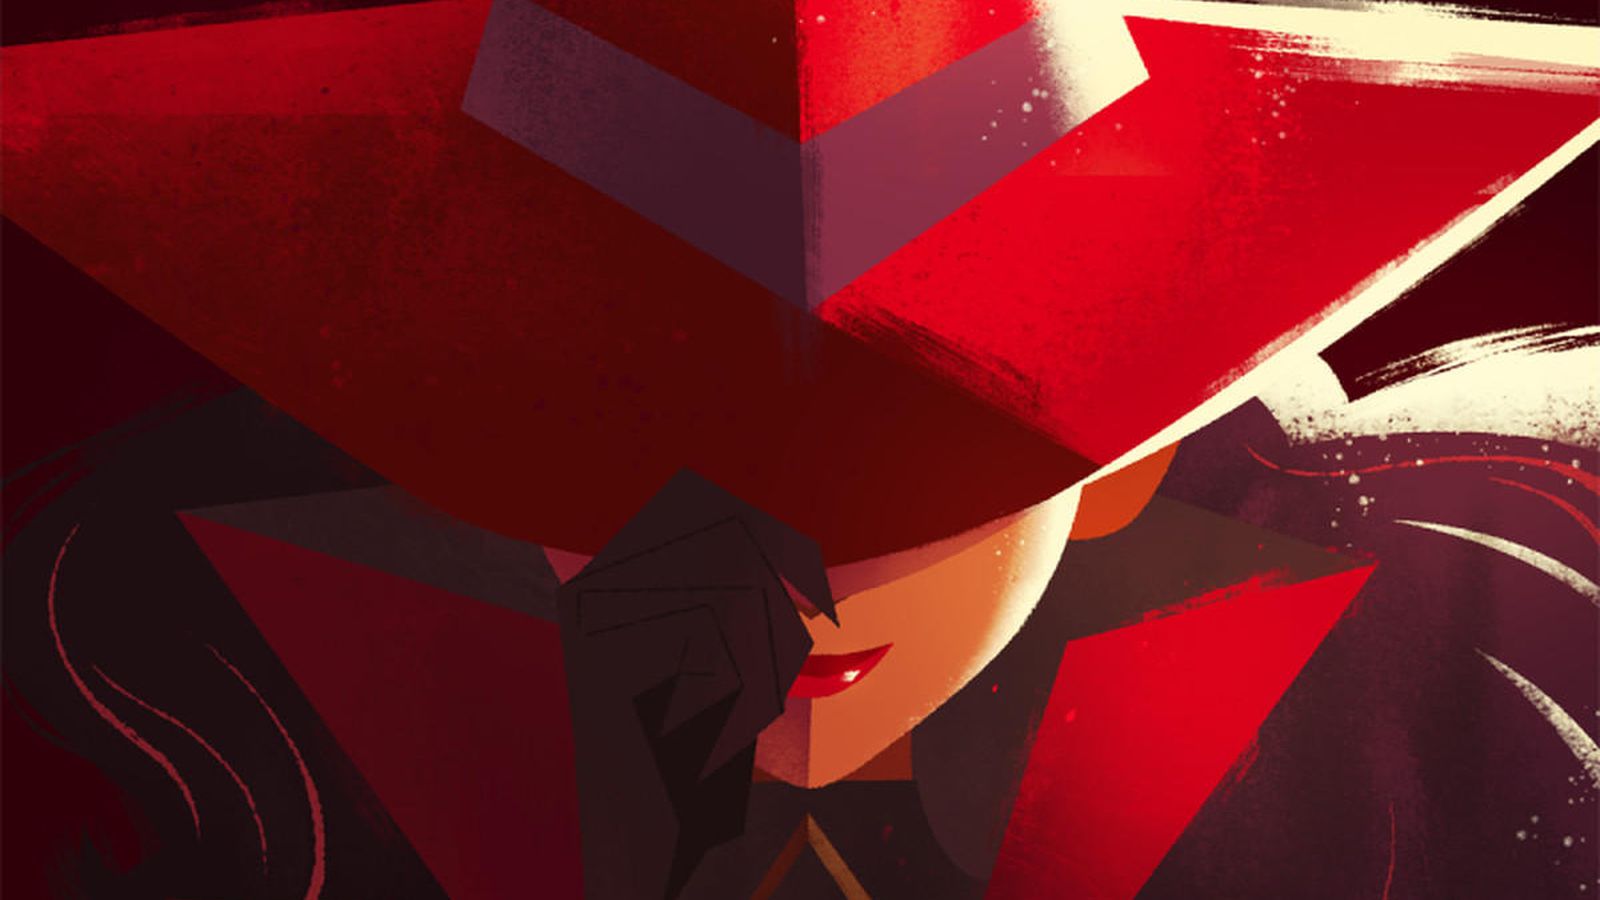 Free download Netflix is making a Carmen Sandiego movie with Gina